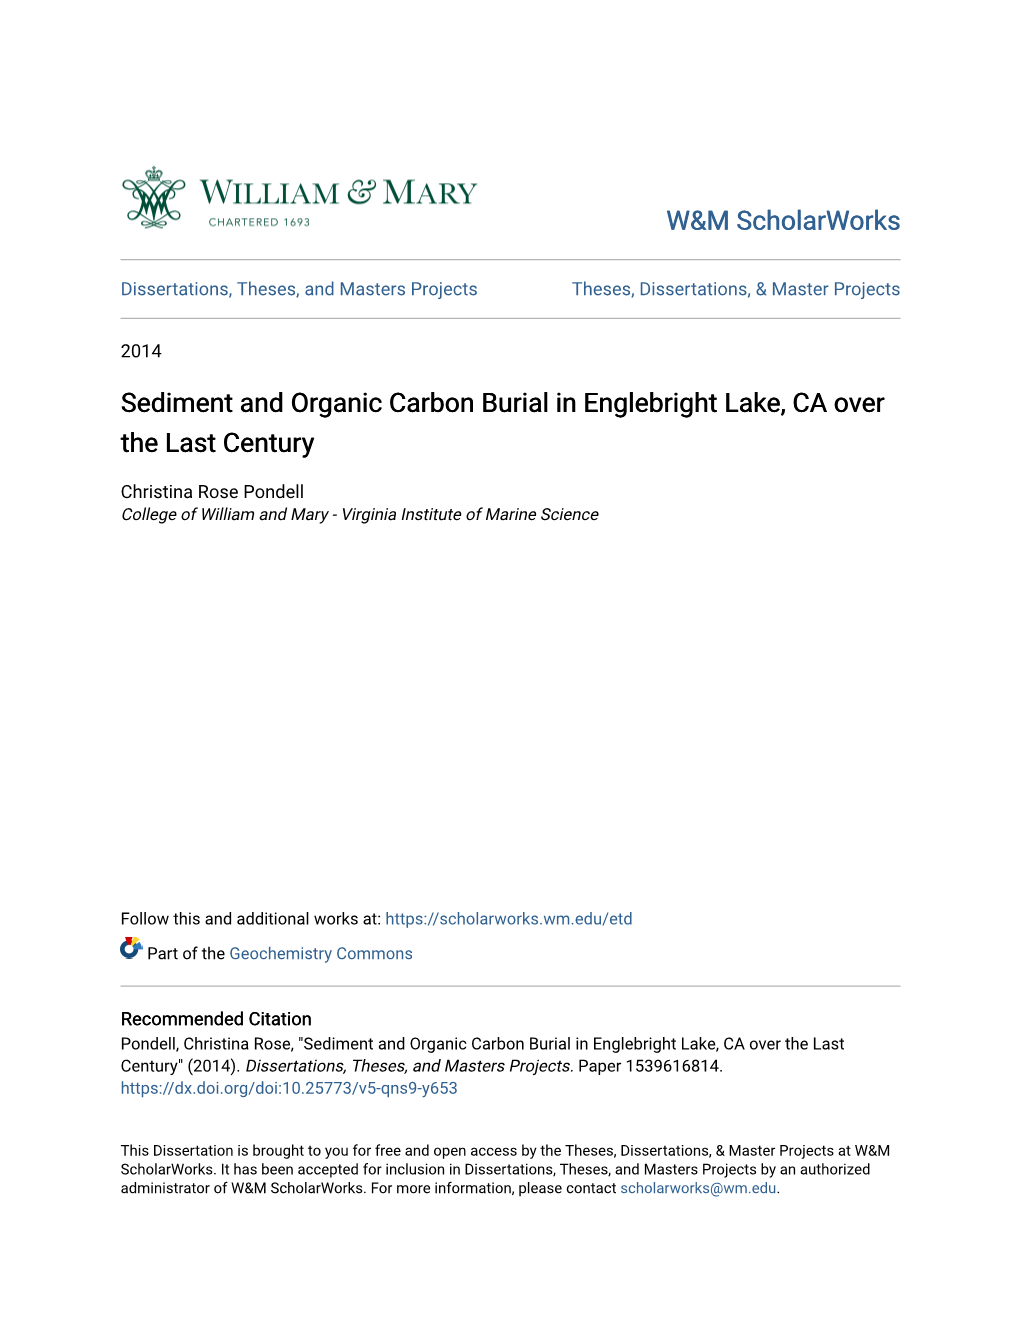 Sediment and Organic Carbon Burial in Englebright Lake, CA Over the Last Century